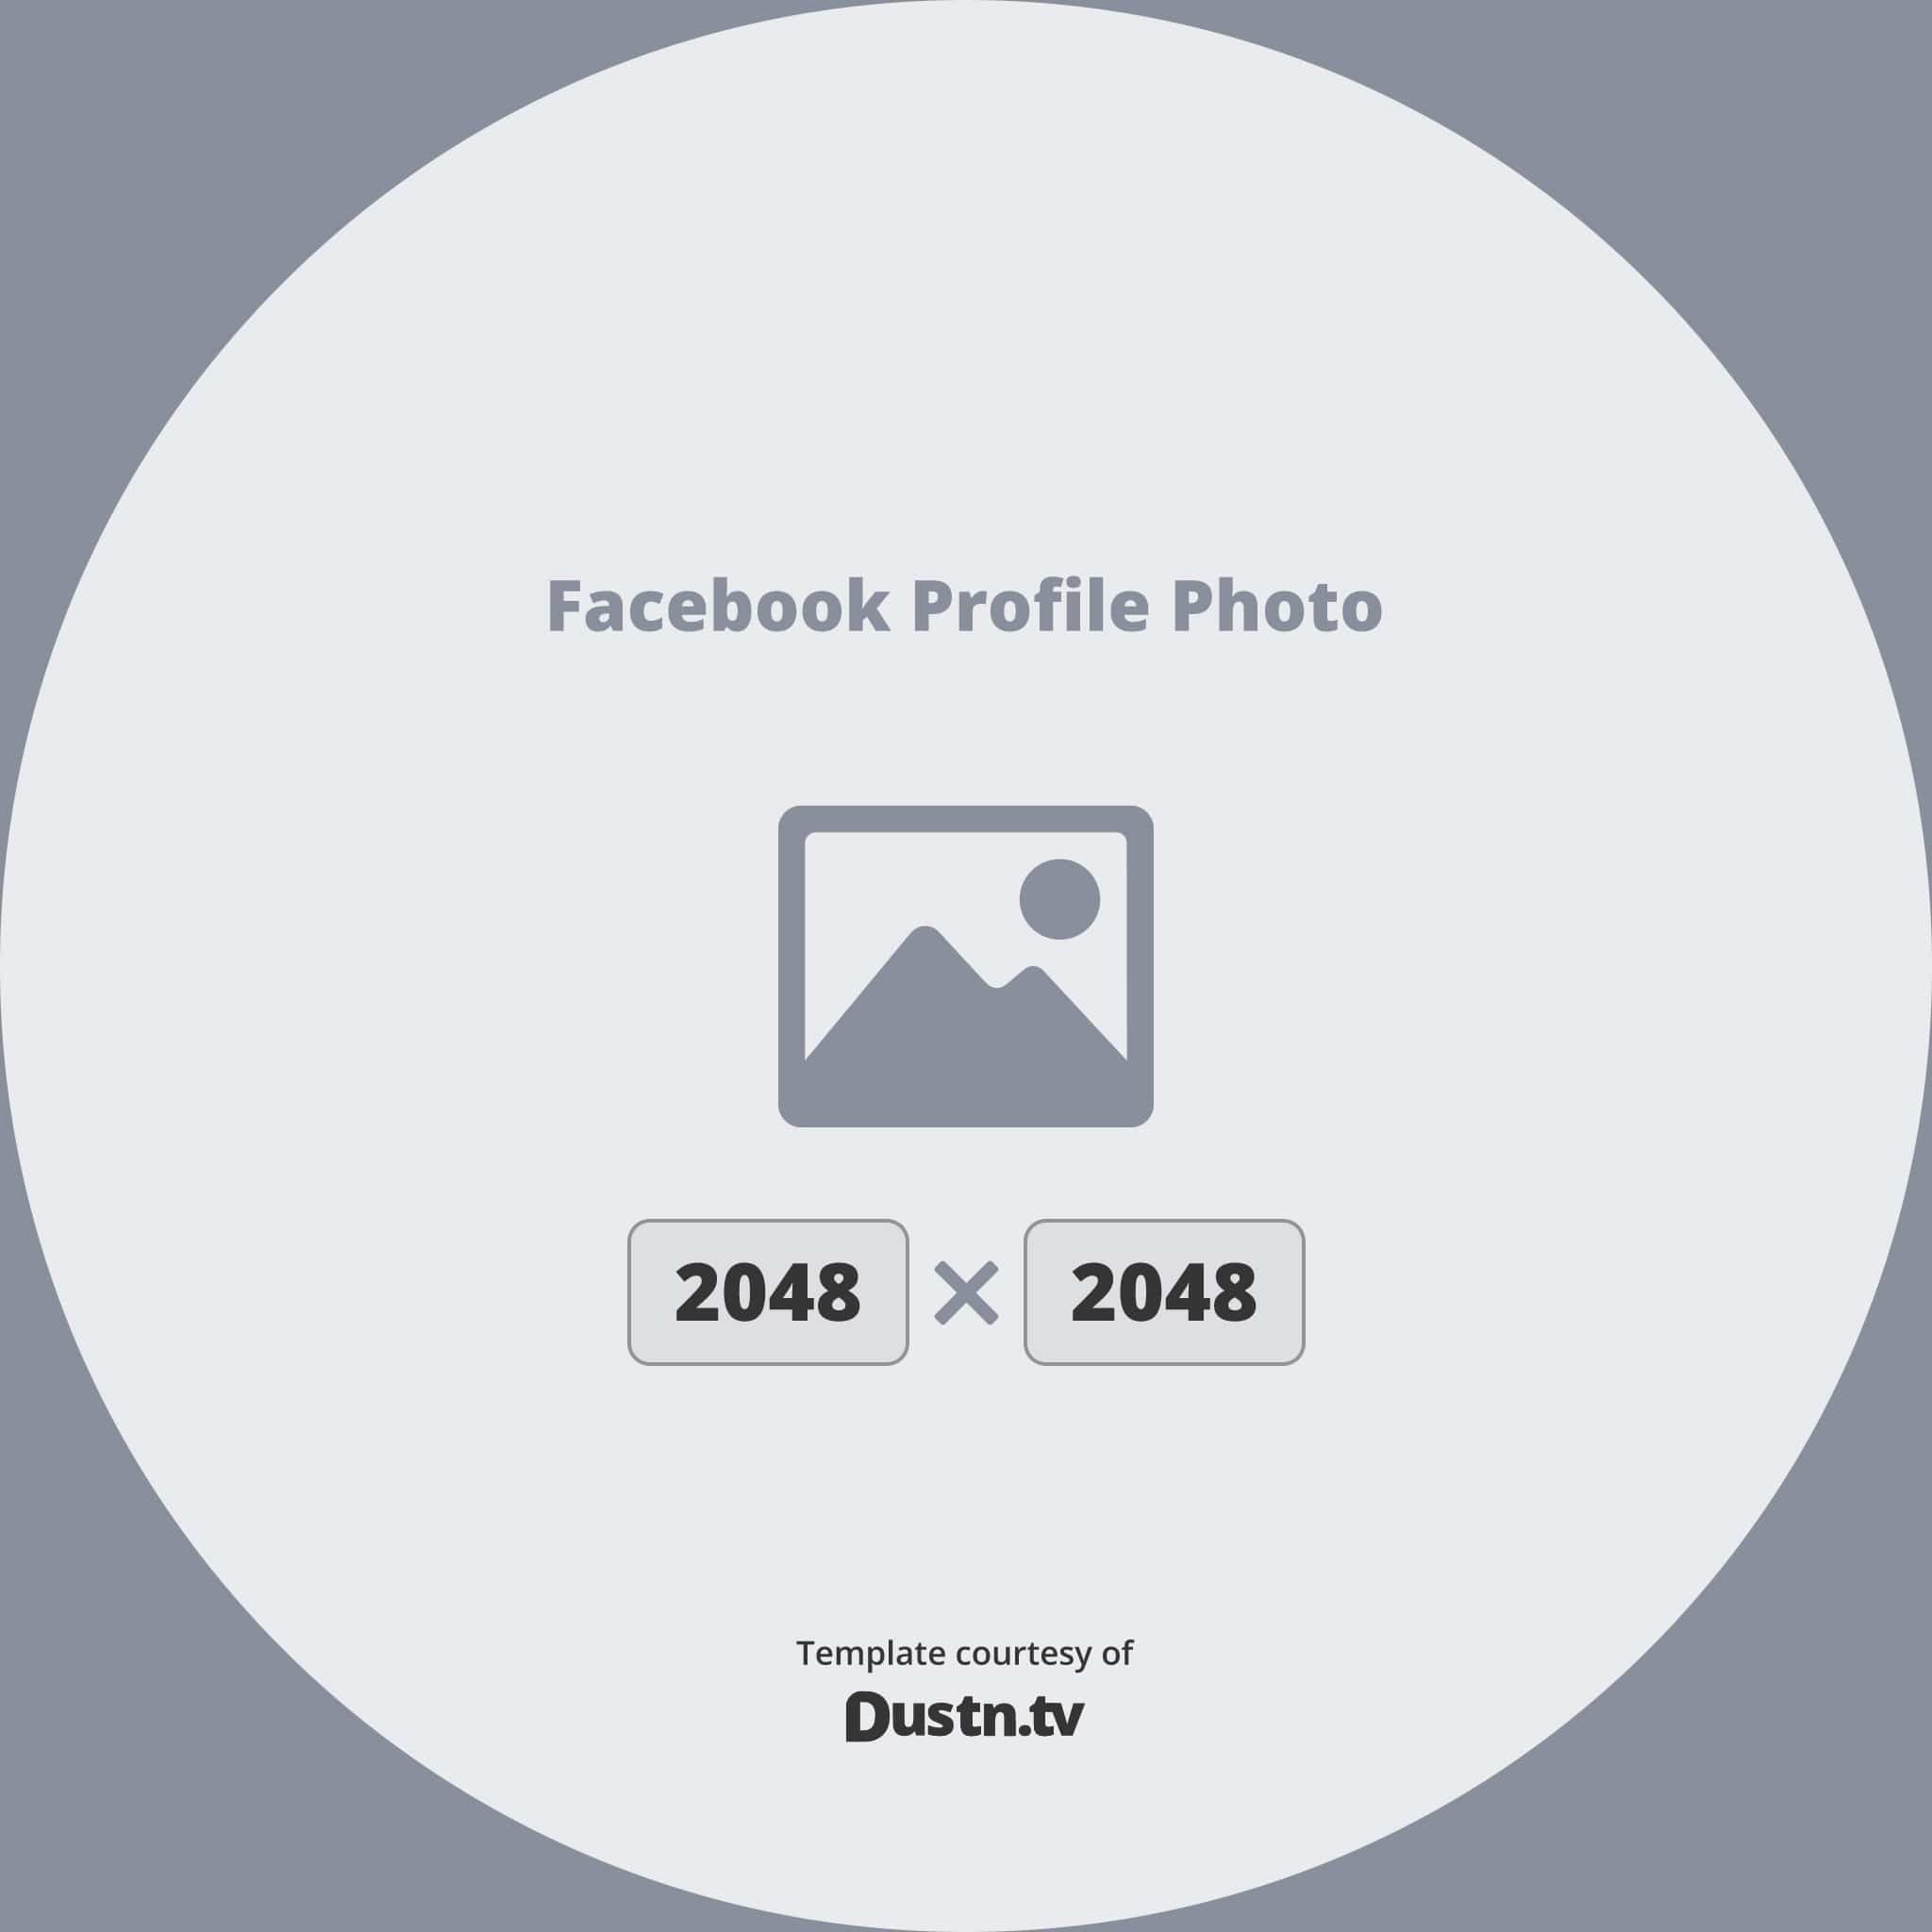 Profile Logo - Facebook Image Sizes & Dimensions 2019: Everything You Need to Know